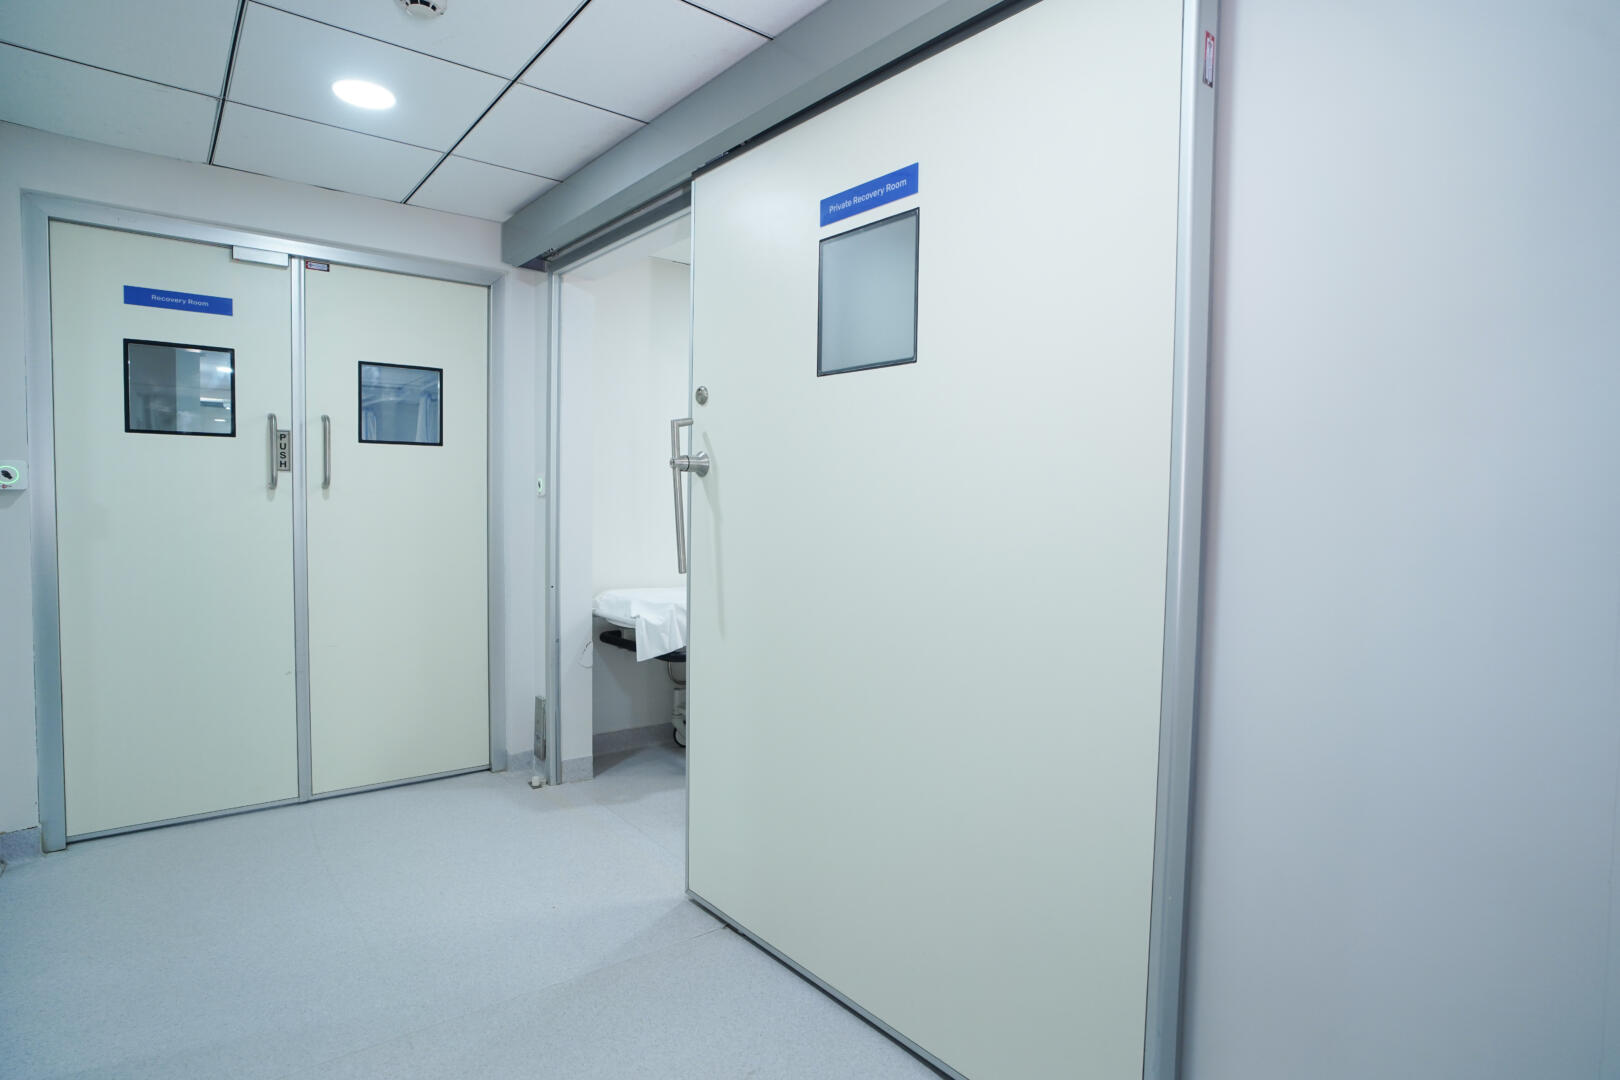 The Impact of Hermetic Doors on Healthcare Facility Hygiene